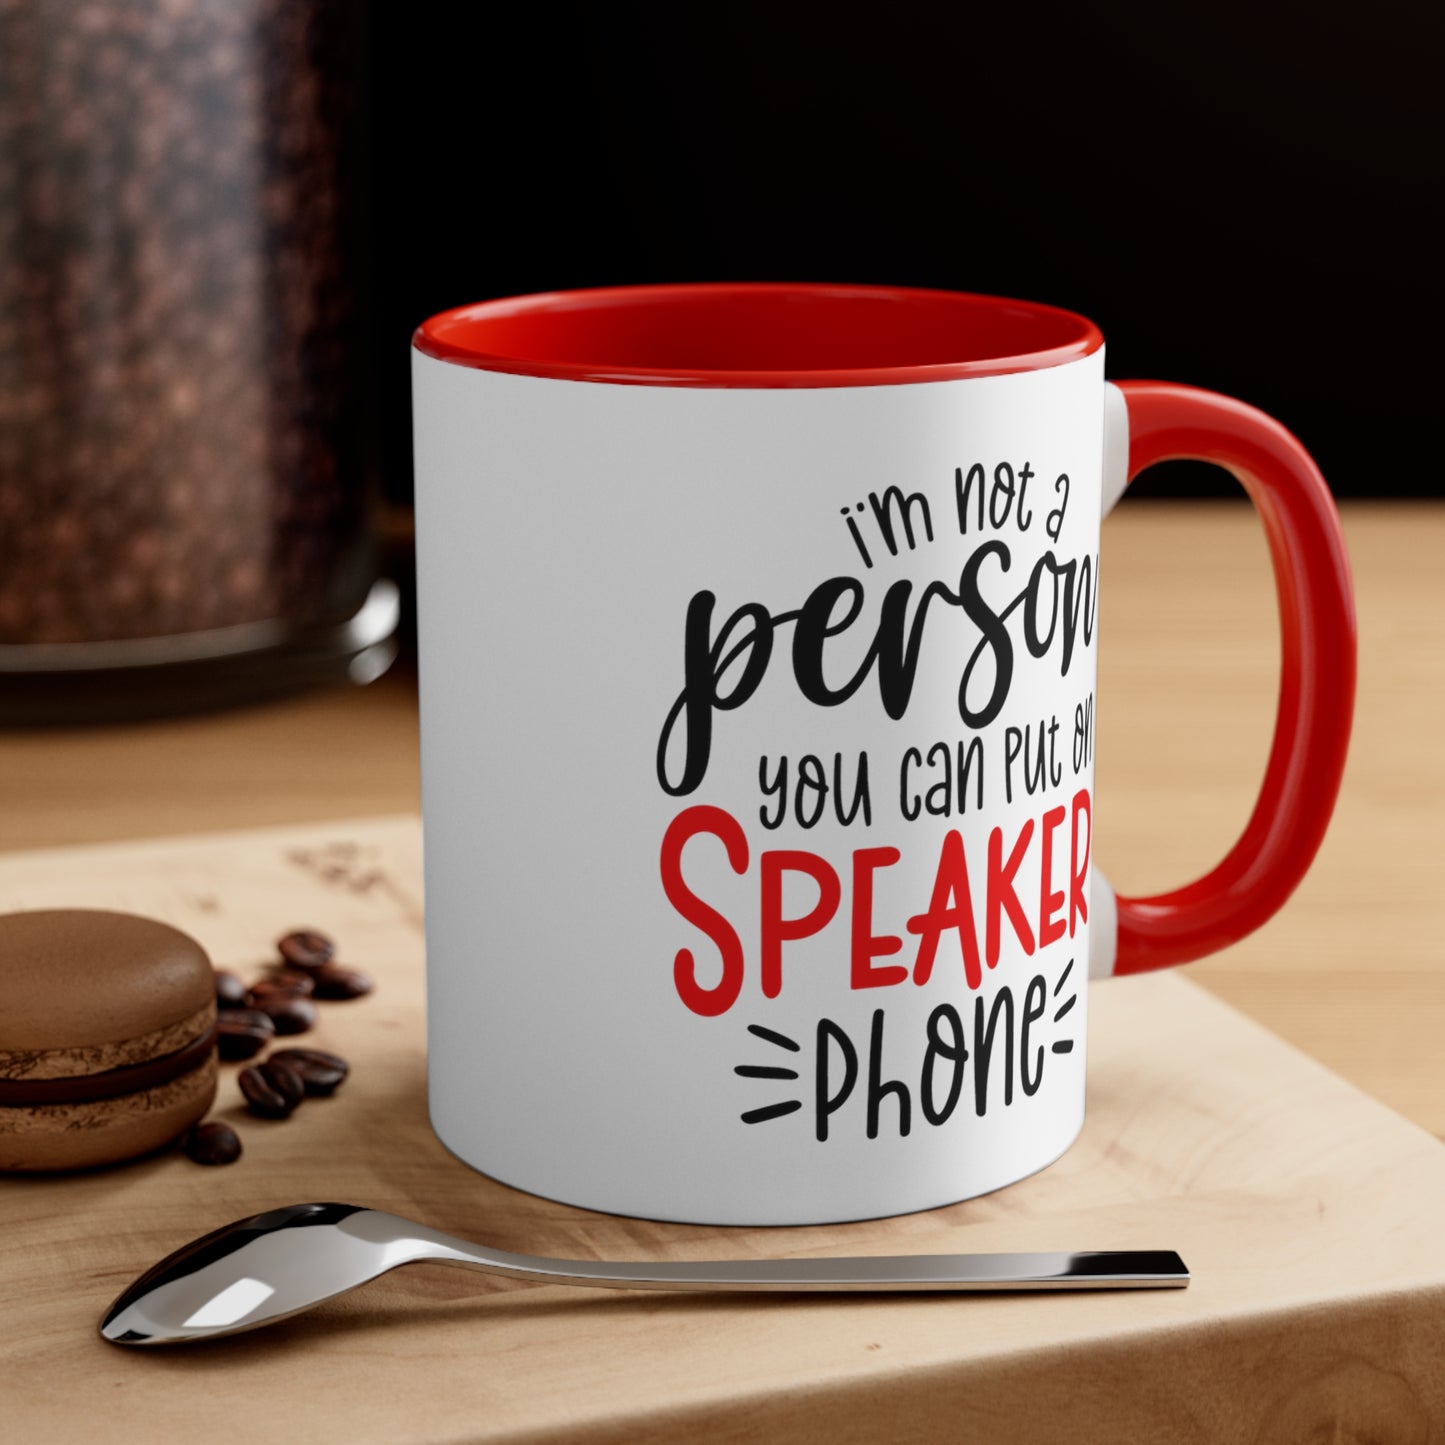 Not A Person You Can Put on Speakerphone 11oz Coffee Mug.